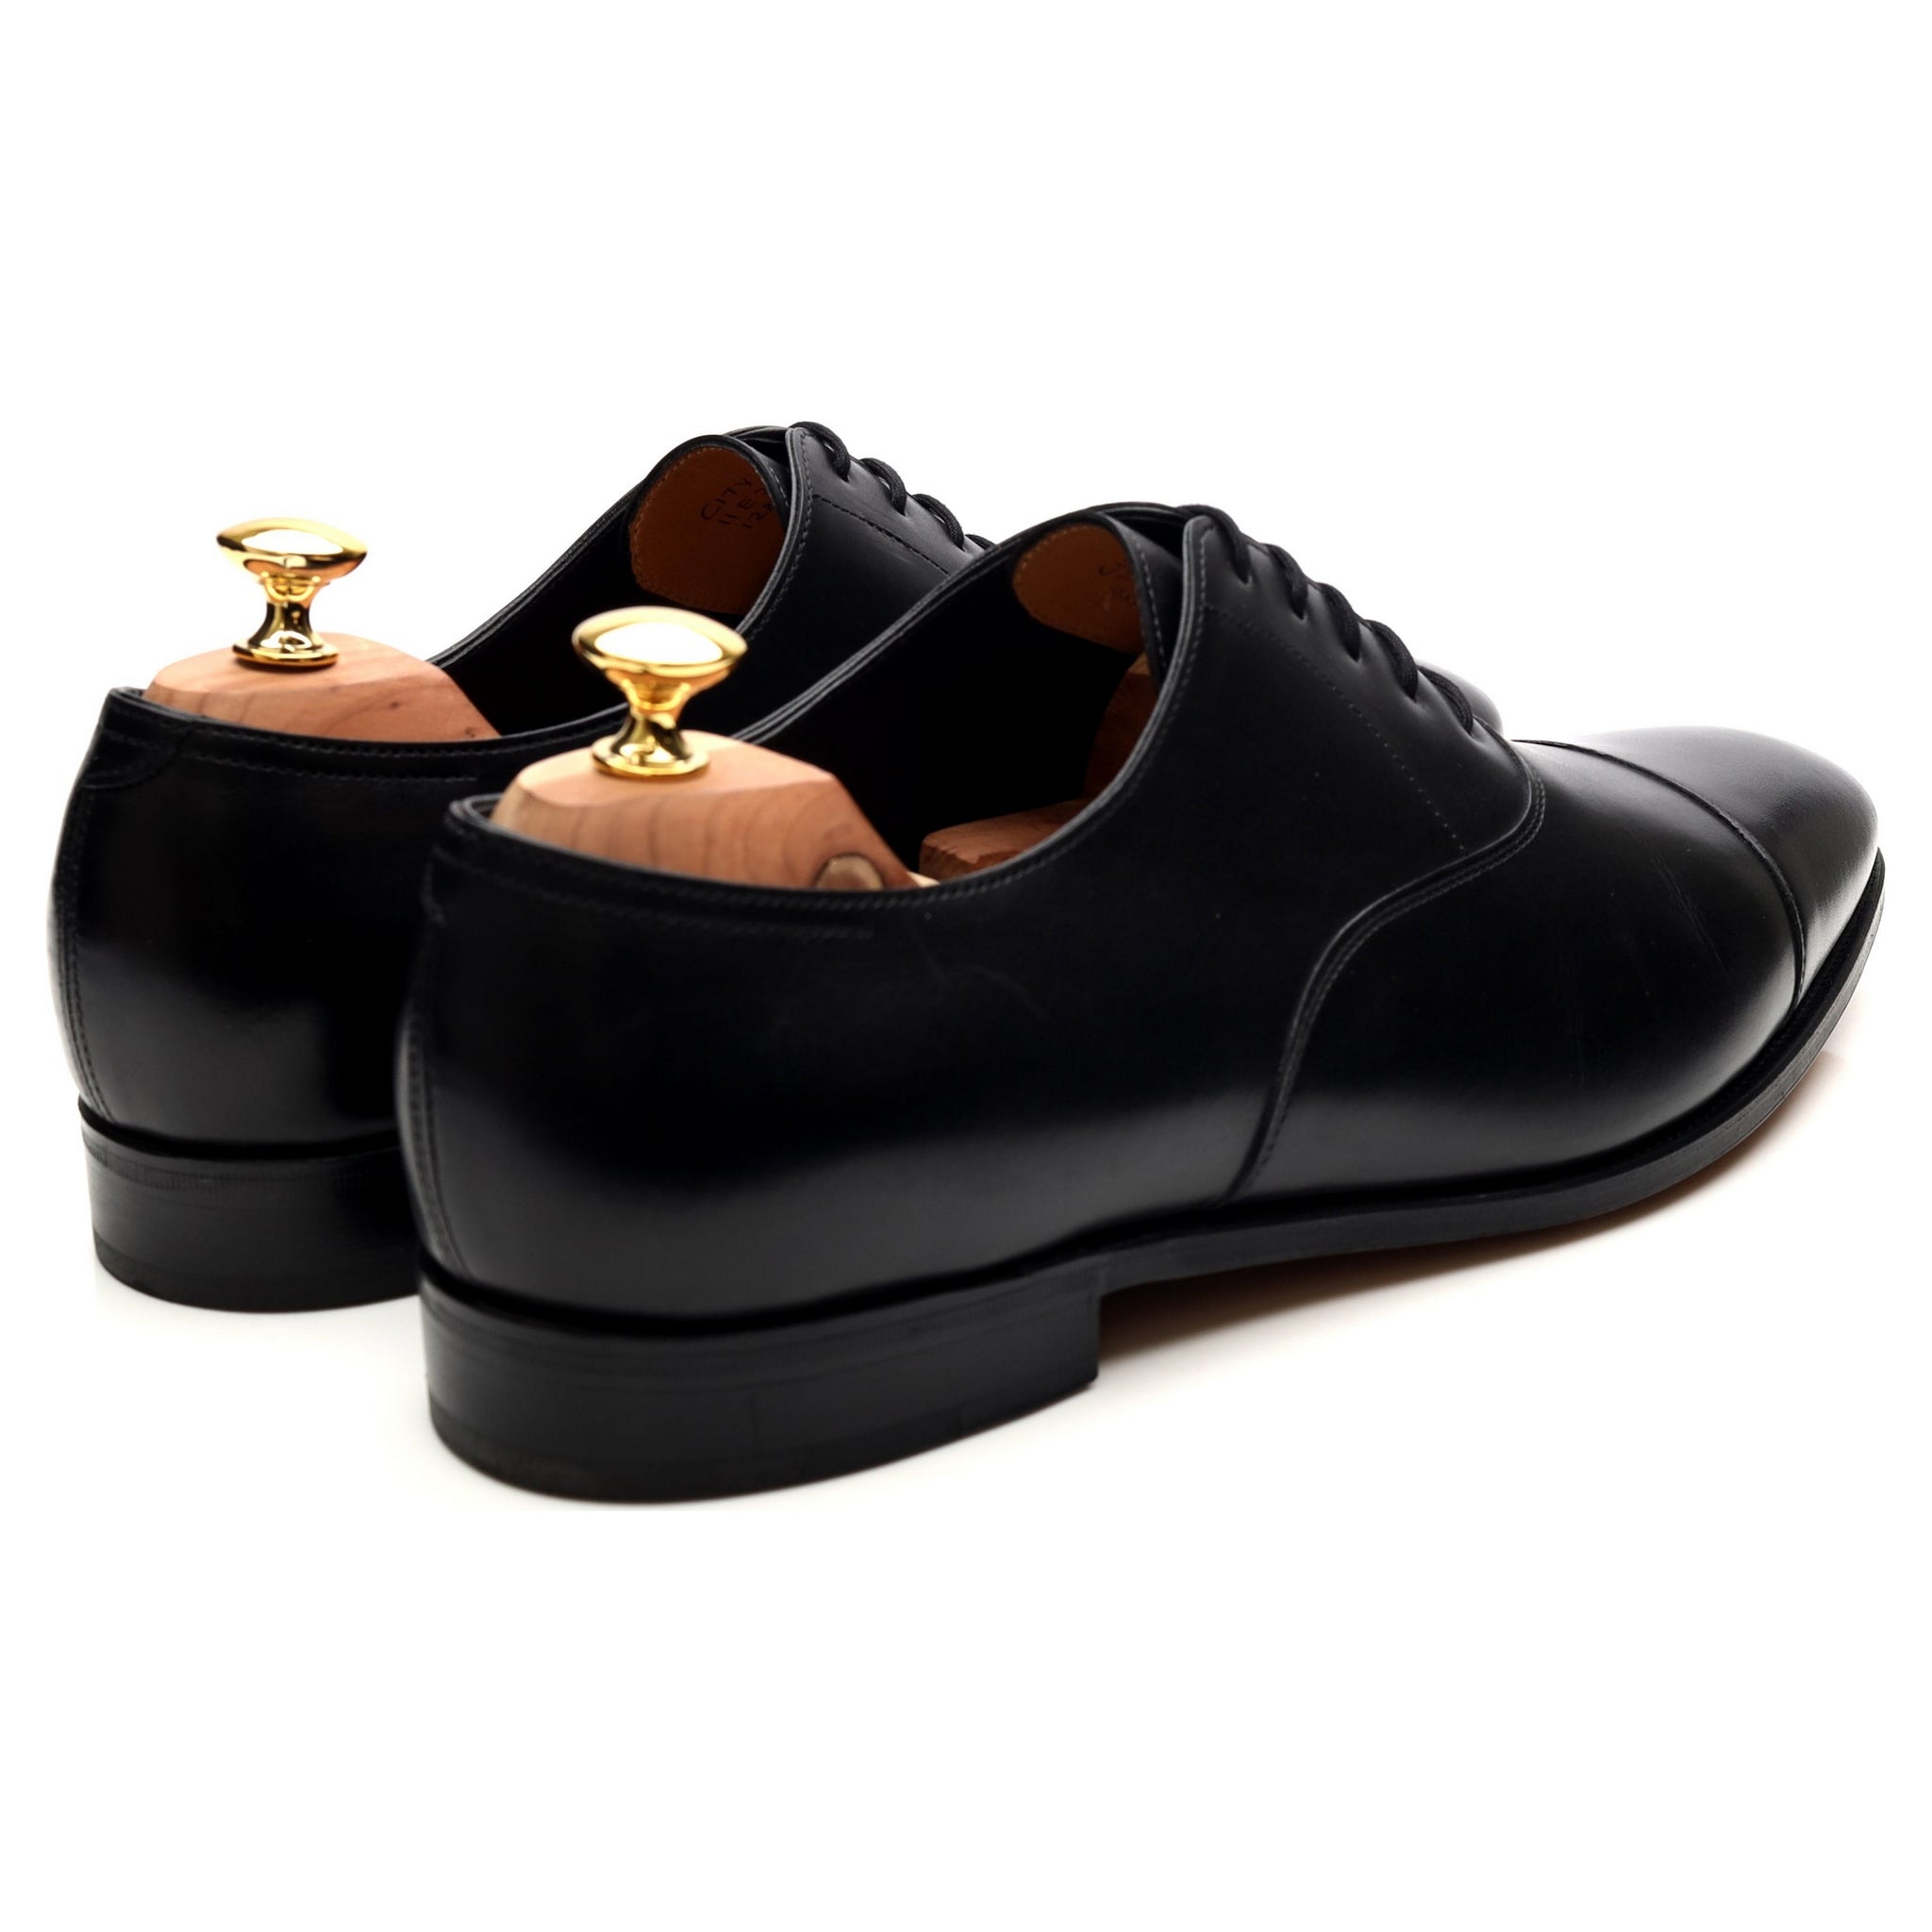 City II' Black Leather Oxford UK 11 E - Abbot's Shoes